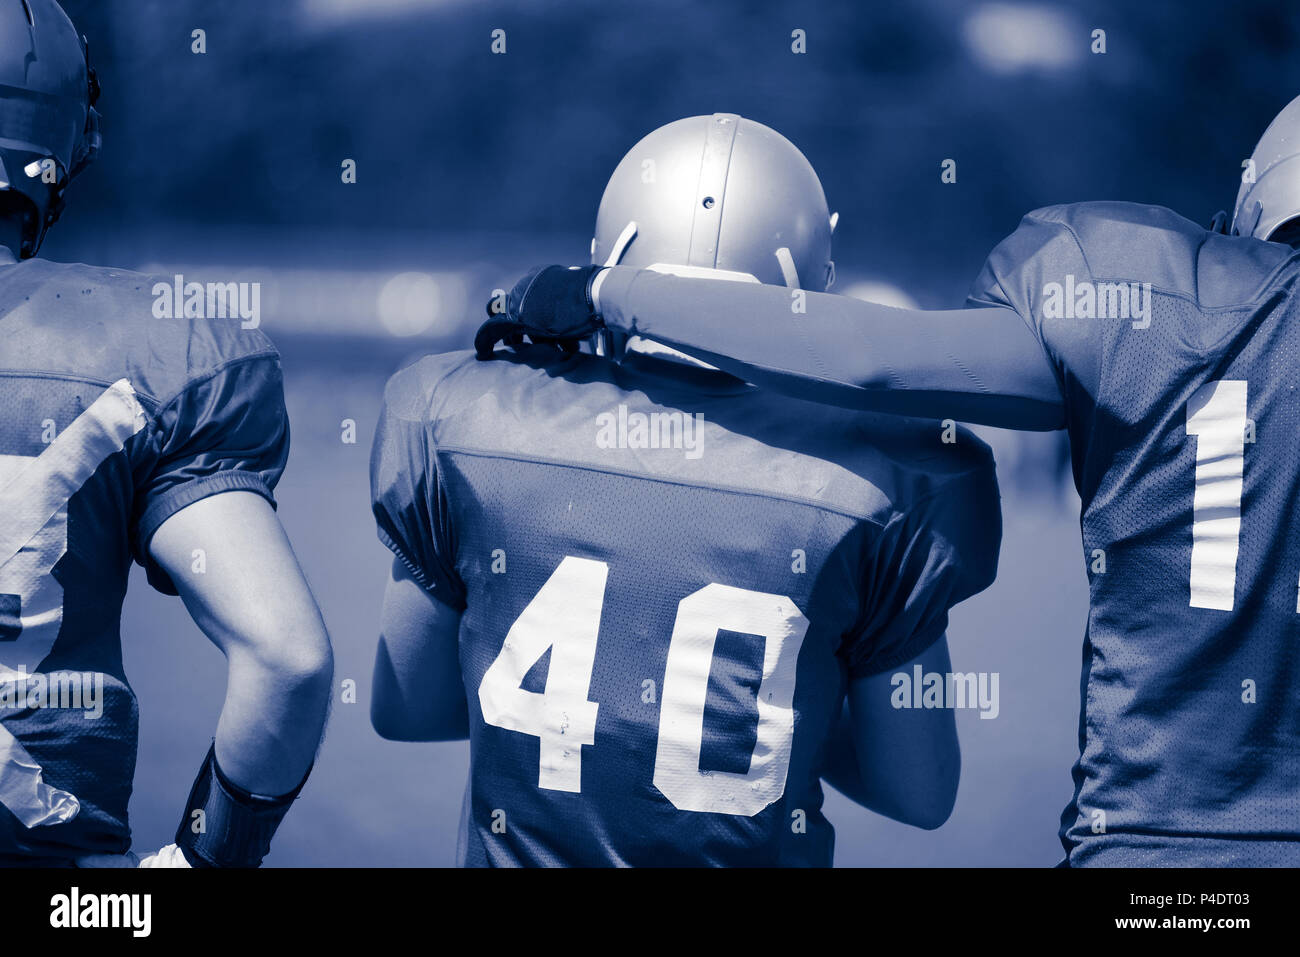 Duo toned image of American Football players in action Stock Photo